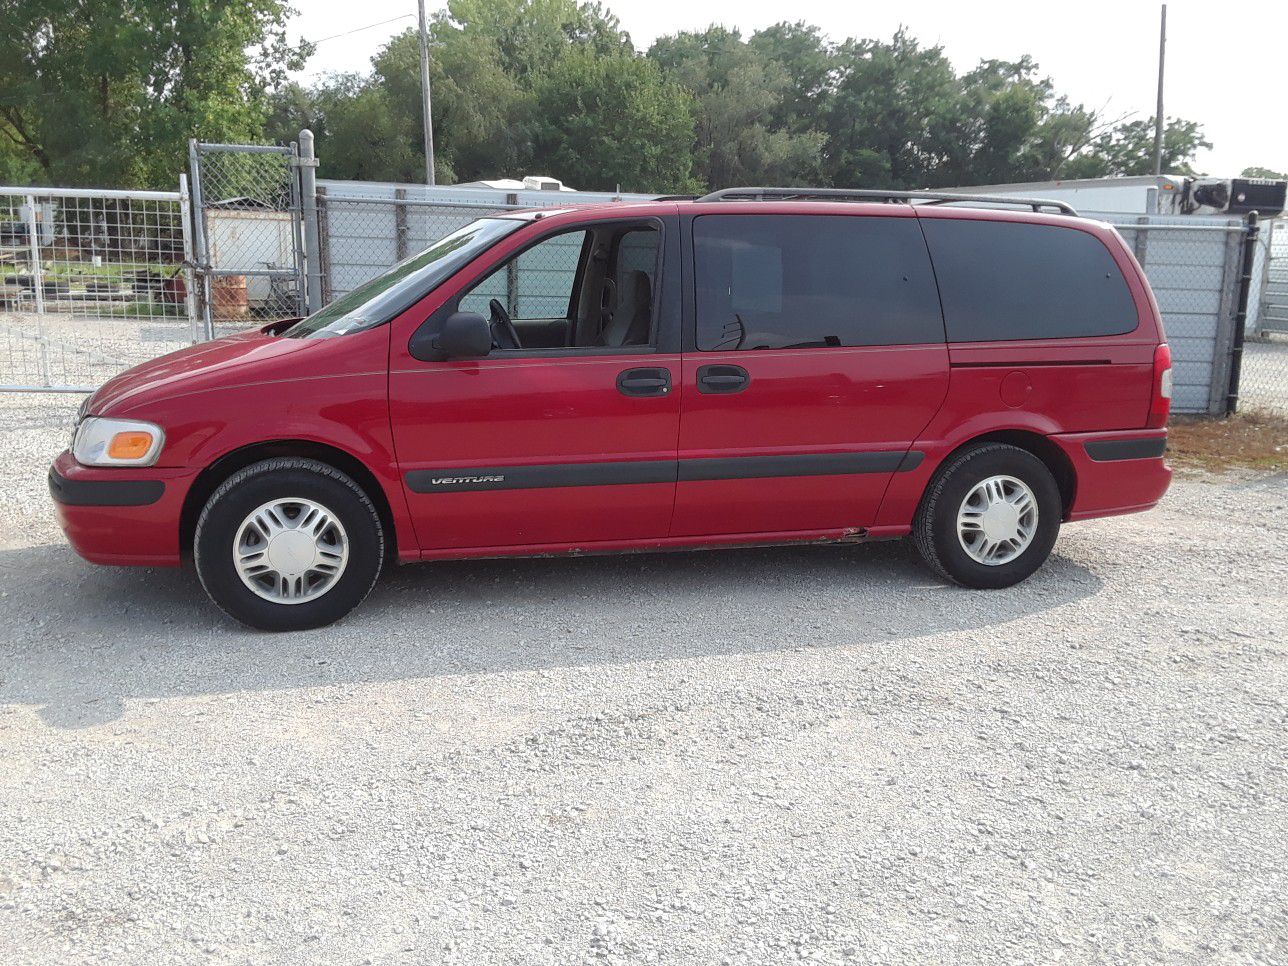 1998 Chevy venture runs good for Sale in Kansas City, MO - OfferUp